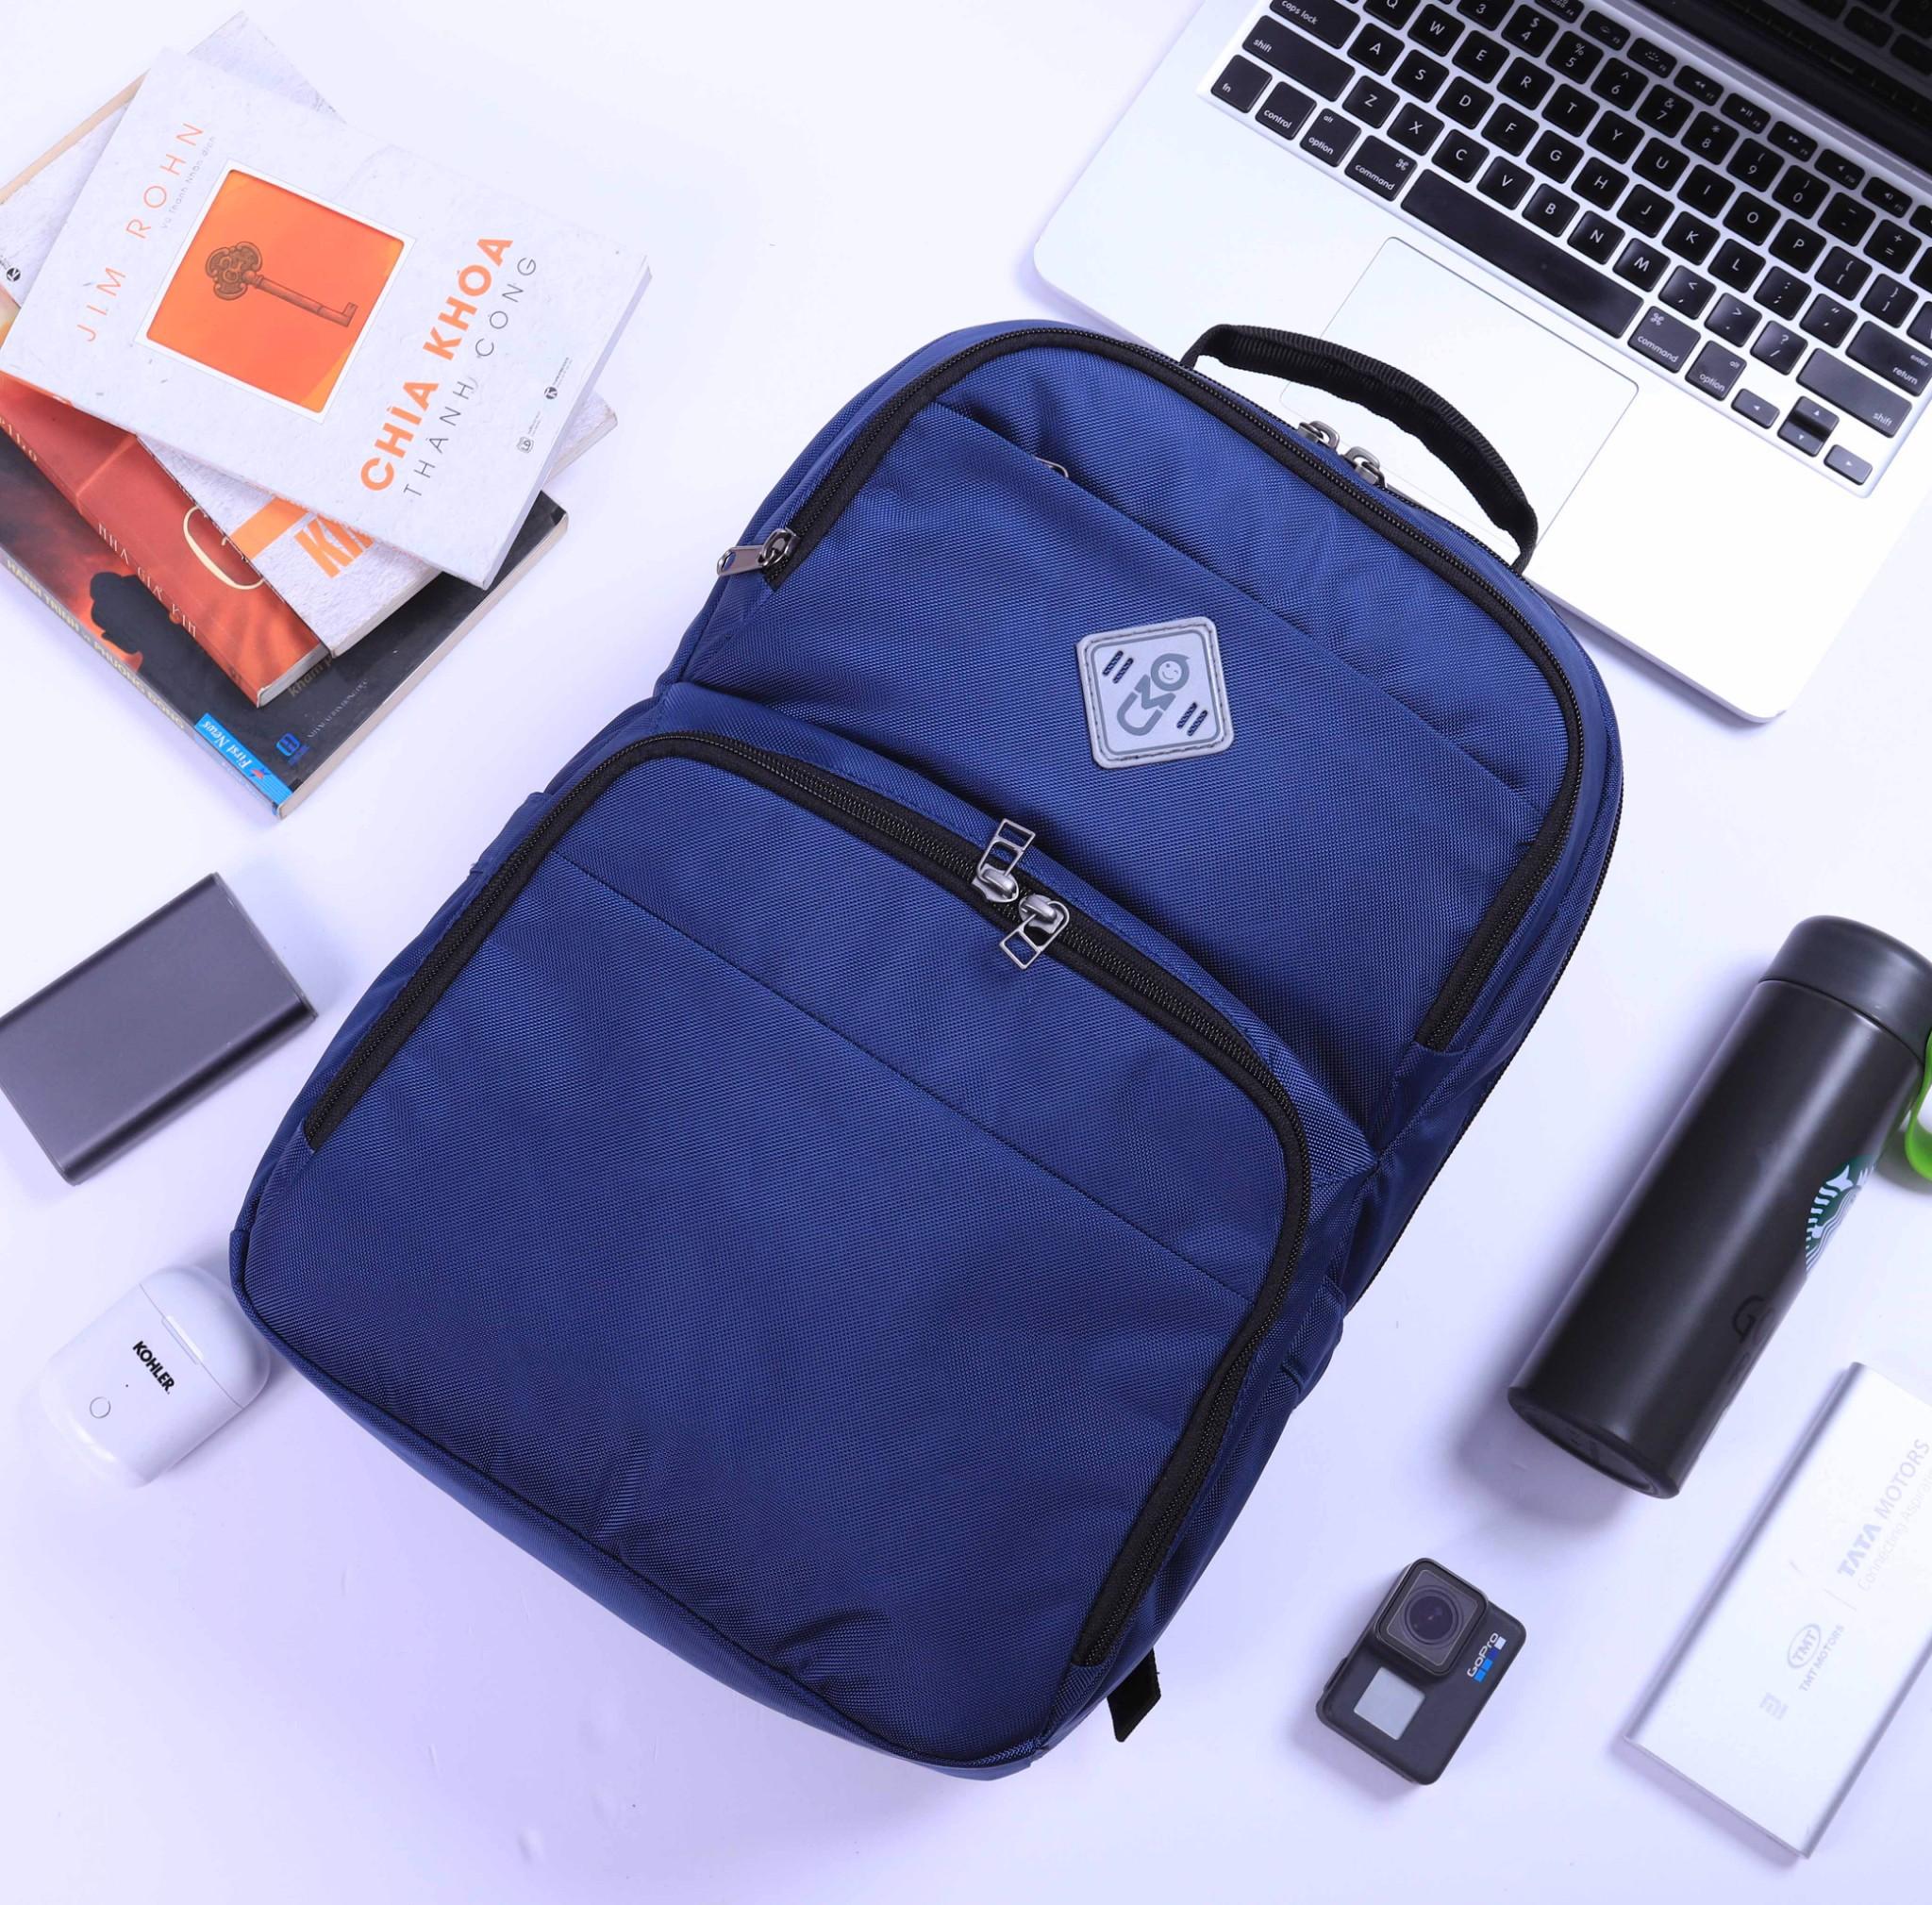 UMO DYNAMIC BackPack Navy- Balo Laptop Cao Cấp